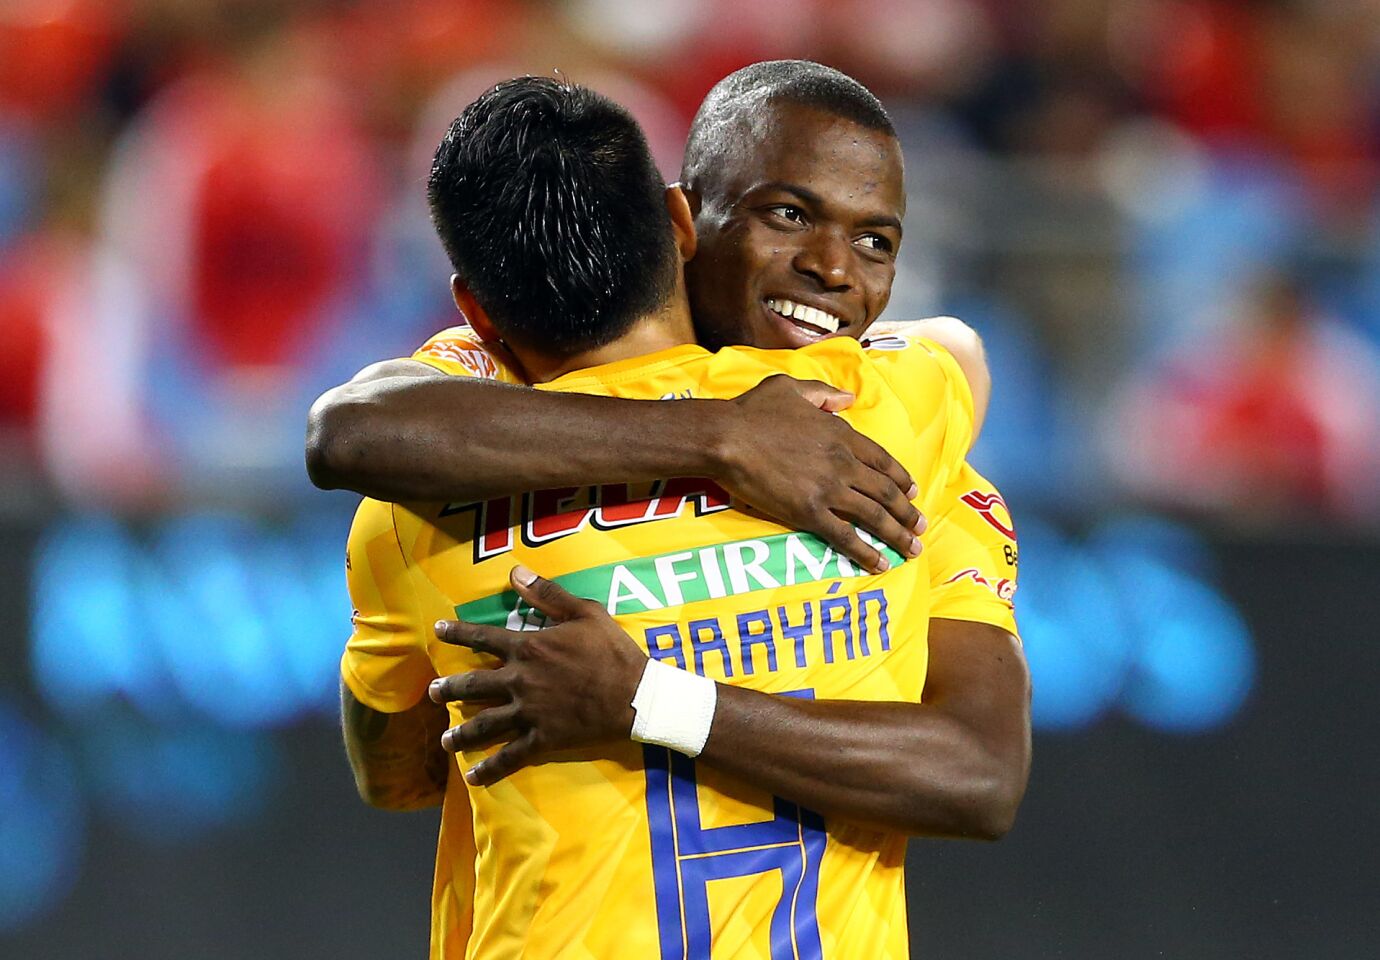 TORONTO, ON - SEPTEMBER 19: Enner Valencia #13 of Tigres UANL celebrates a goal with Lucas Zelarayán #8 during the second half of the 2018 Campeones Cup Final against Toronto FC at BMO Field on September 19, 2018 in Toronto, Canada. (Photo by Vaughn Ridley/Getty Images) ** OUTS - ELSENT, FPG, CM - OUTS * NM, PH, VA if sourced by CT, LA or MoD **